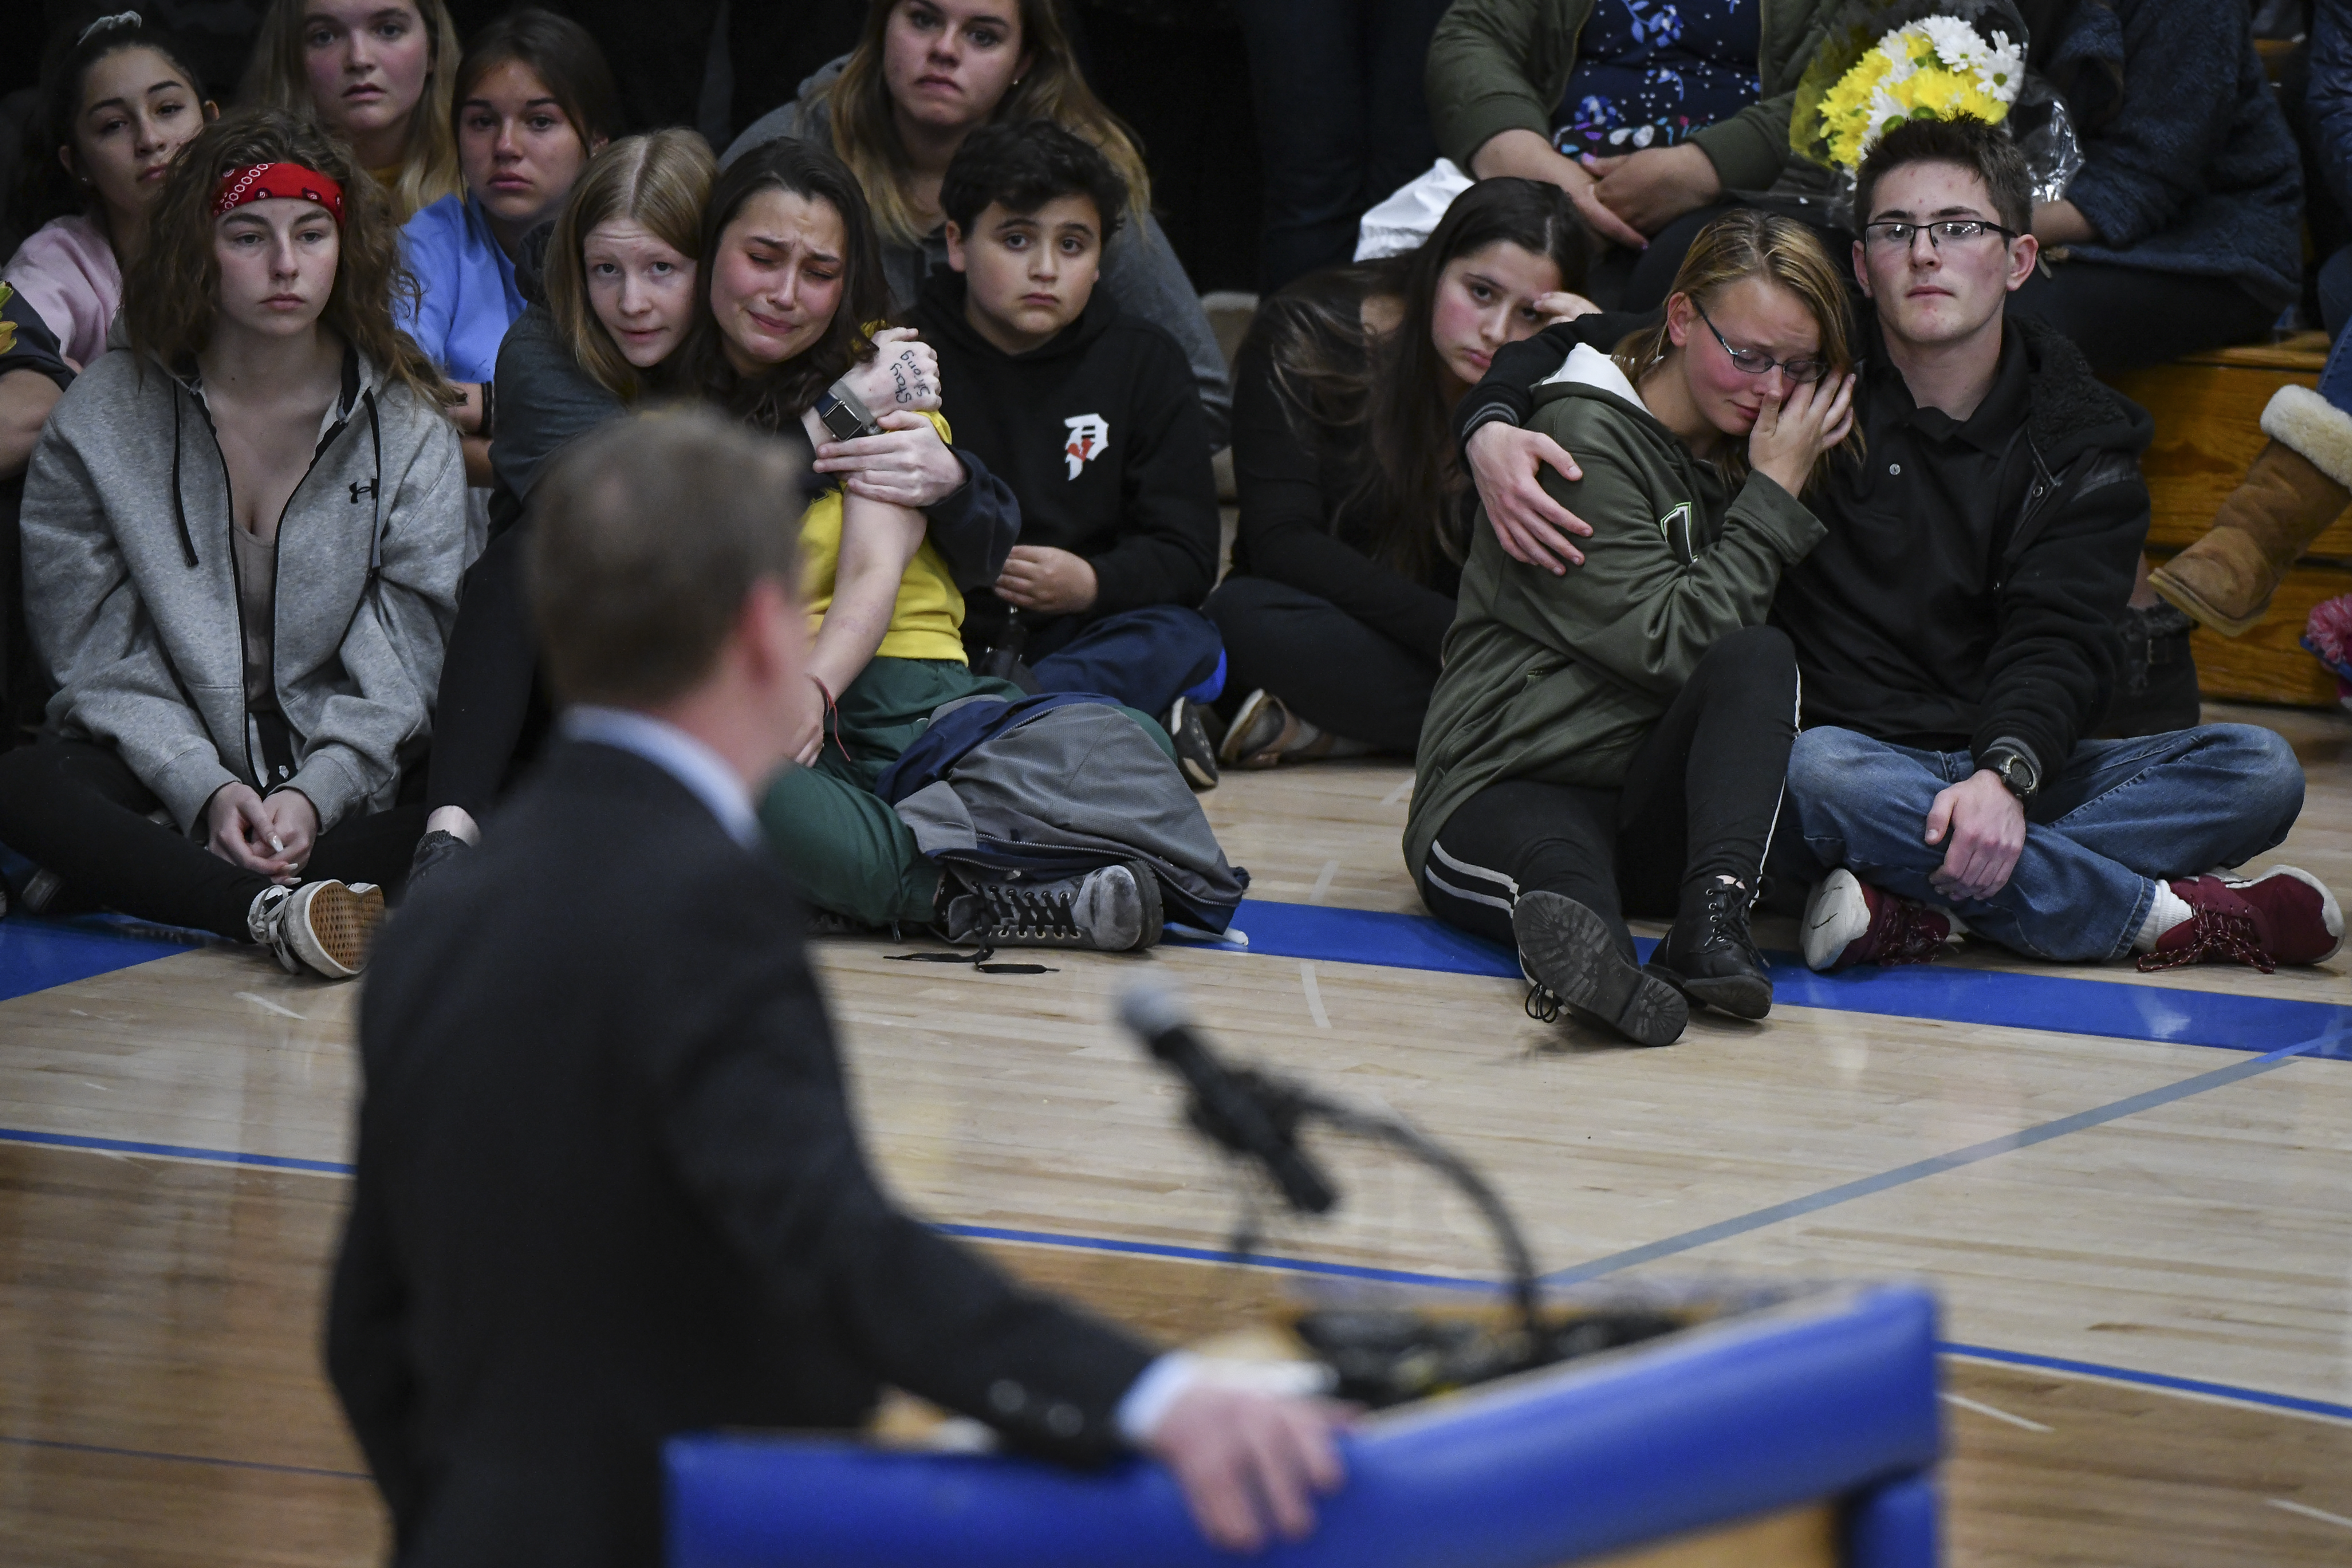 HIGHLANDS RANCH, CO - MAY 08: Students listen as Sen. Michael Bennet (D-CO) speaks during a candlelight vigil at Highlands Ranch High School on May 8, 2019 in Highlands Ranch, Colorado. (Photo by Michael Ciaglo/Getty Images)